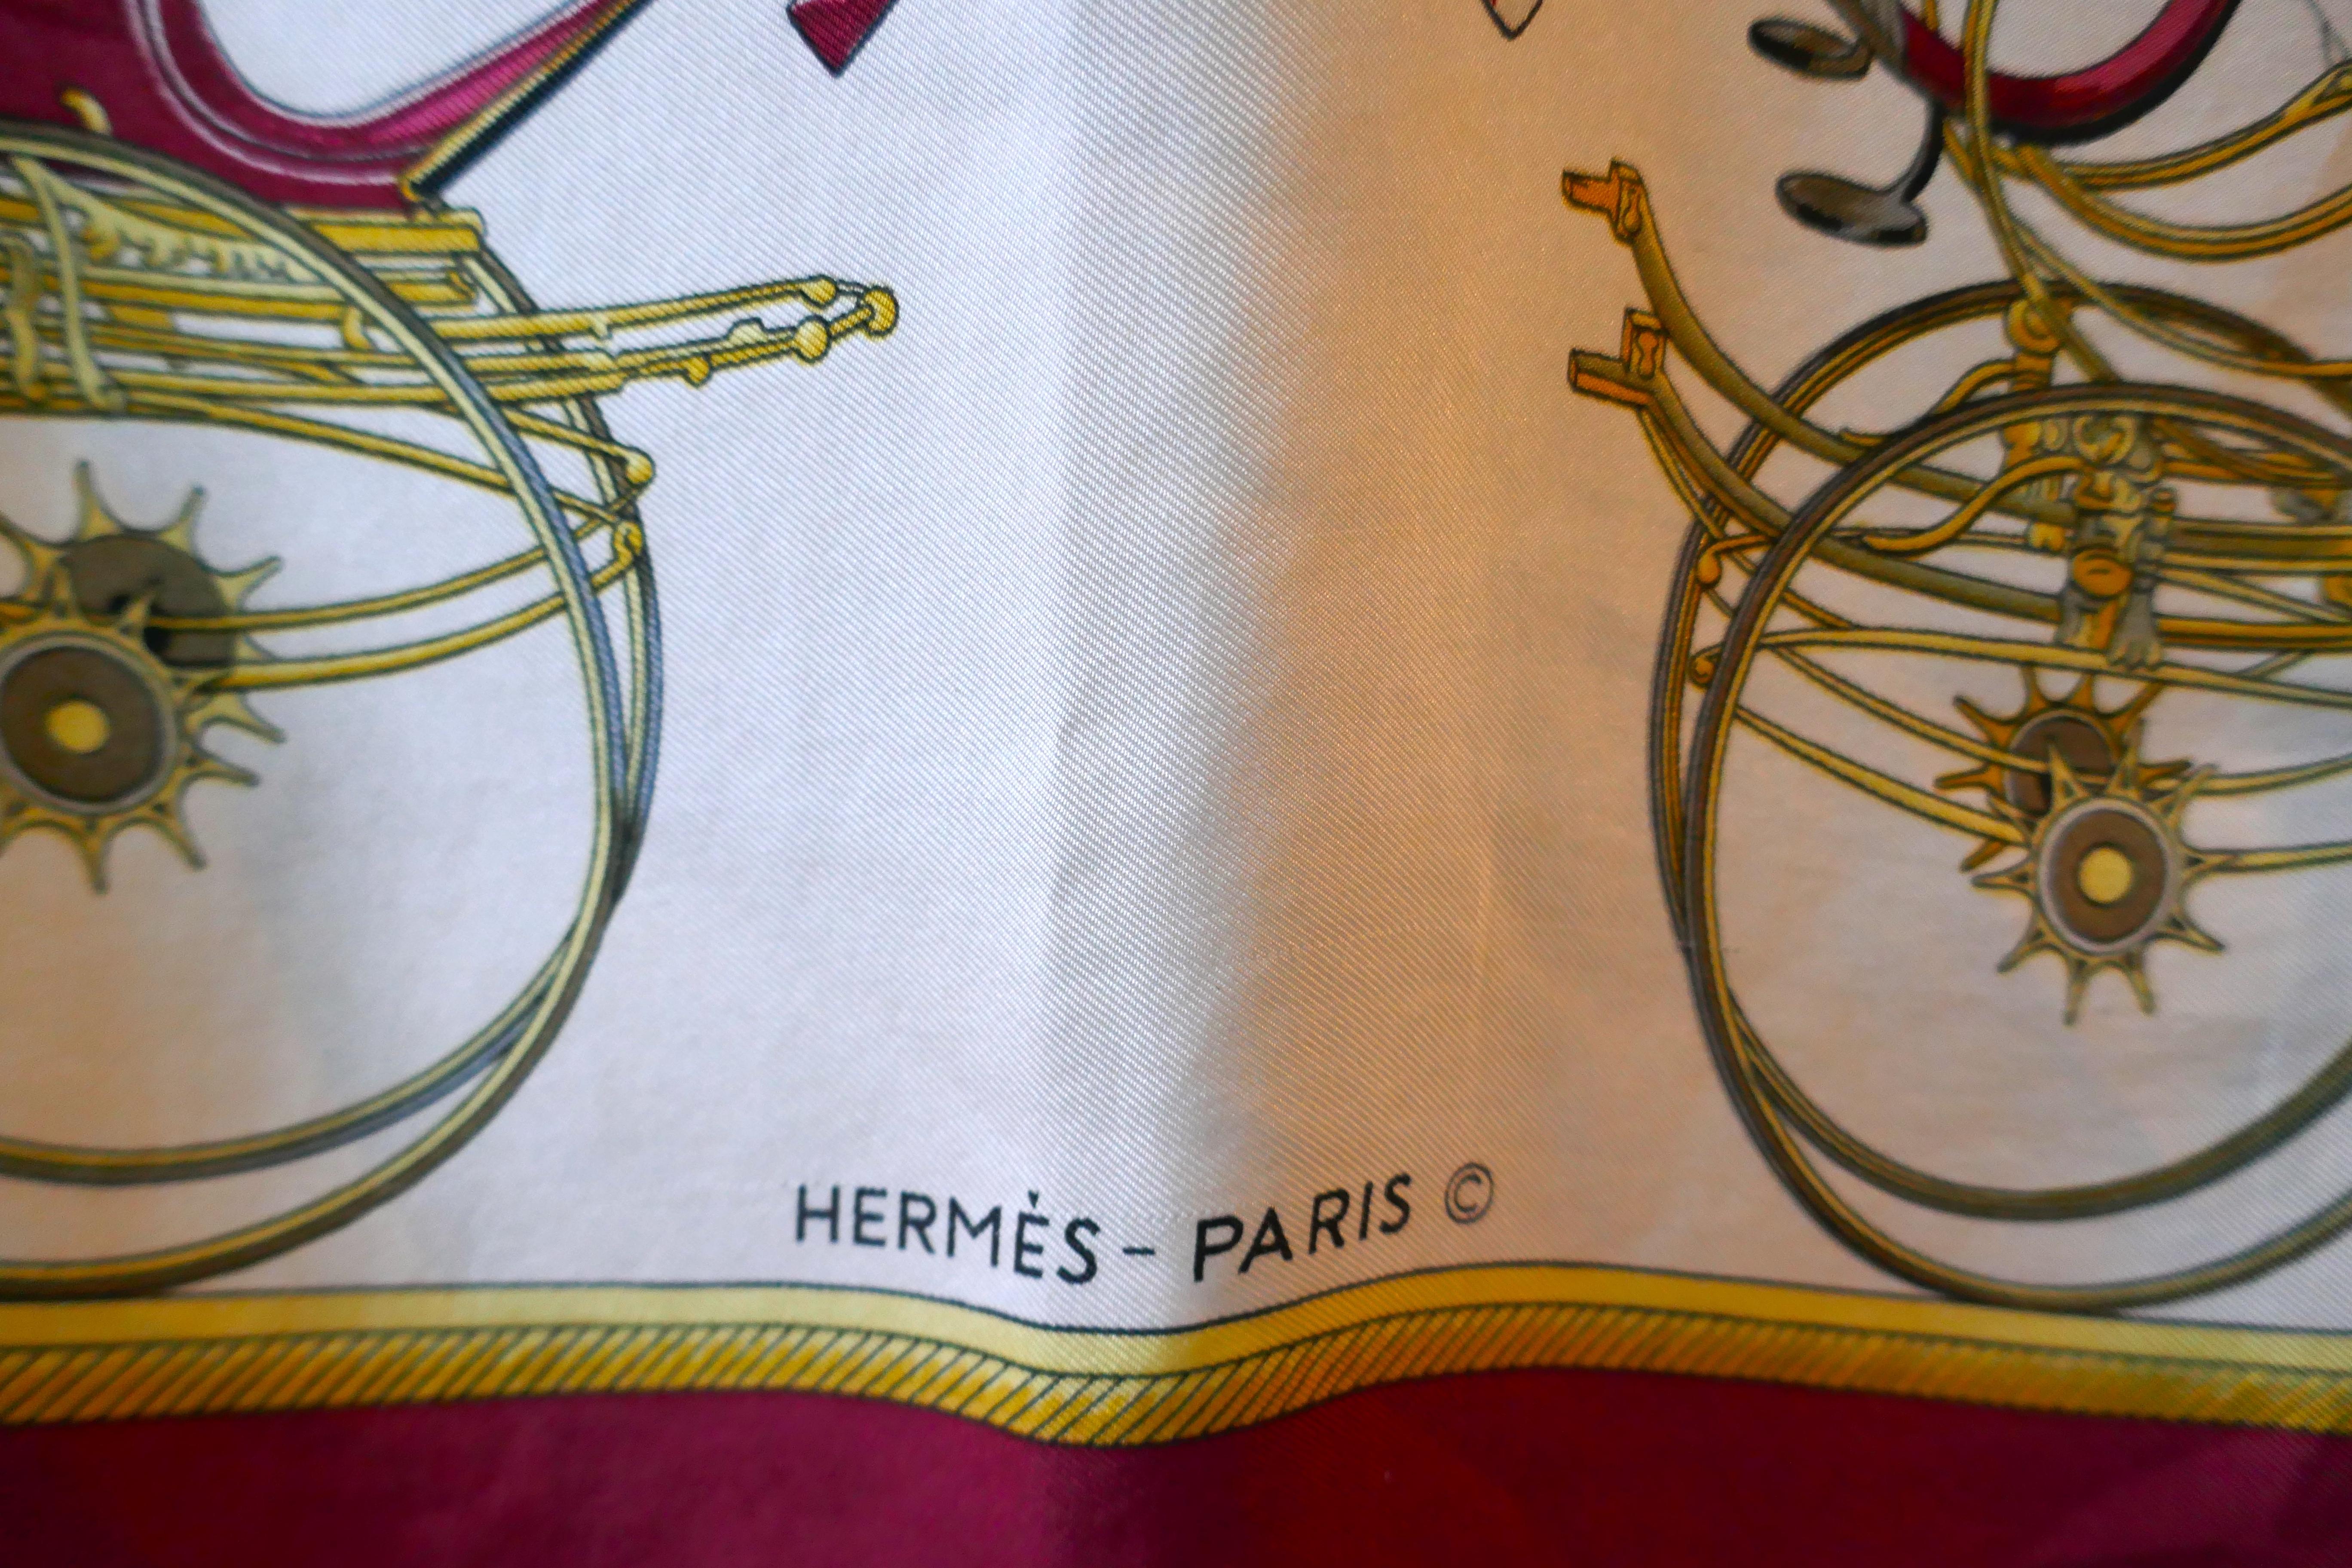 Hermes Scarf “ Les Voitures a Transformation” by Francoise de la Perriere, 1965 In Good Condition For Sale In Chillerton, Isle of Wight